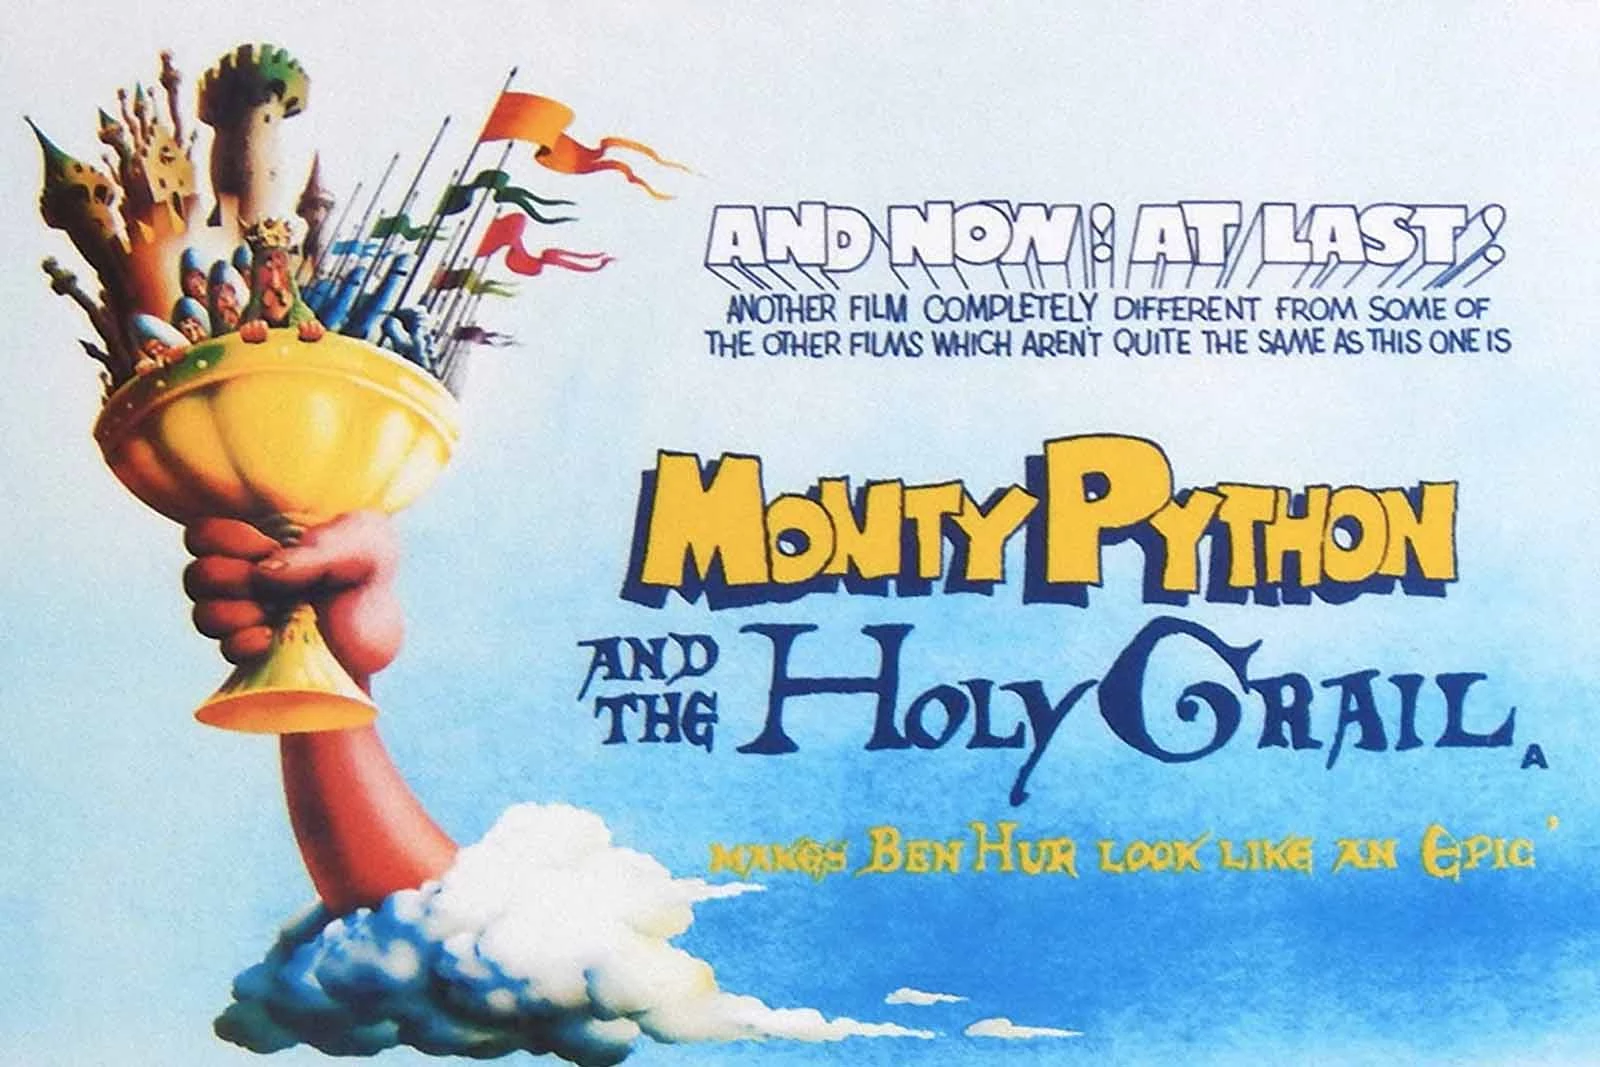 Monty Python and Philosophy by Gary L. Hardcastle